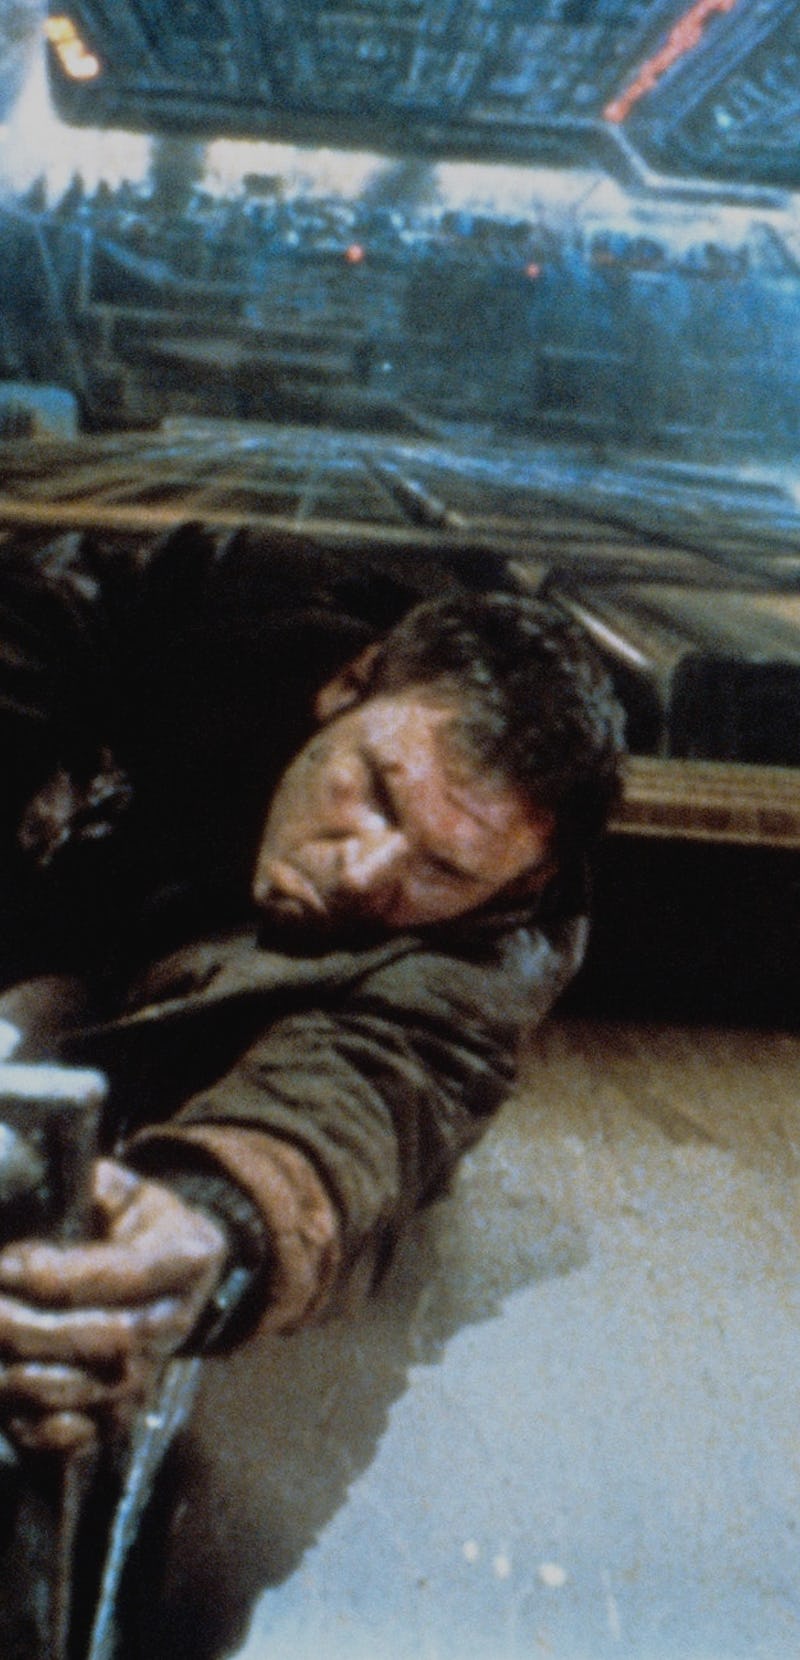 Deckard hanging from roof ledge in Blade Runner